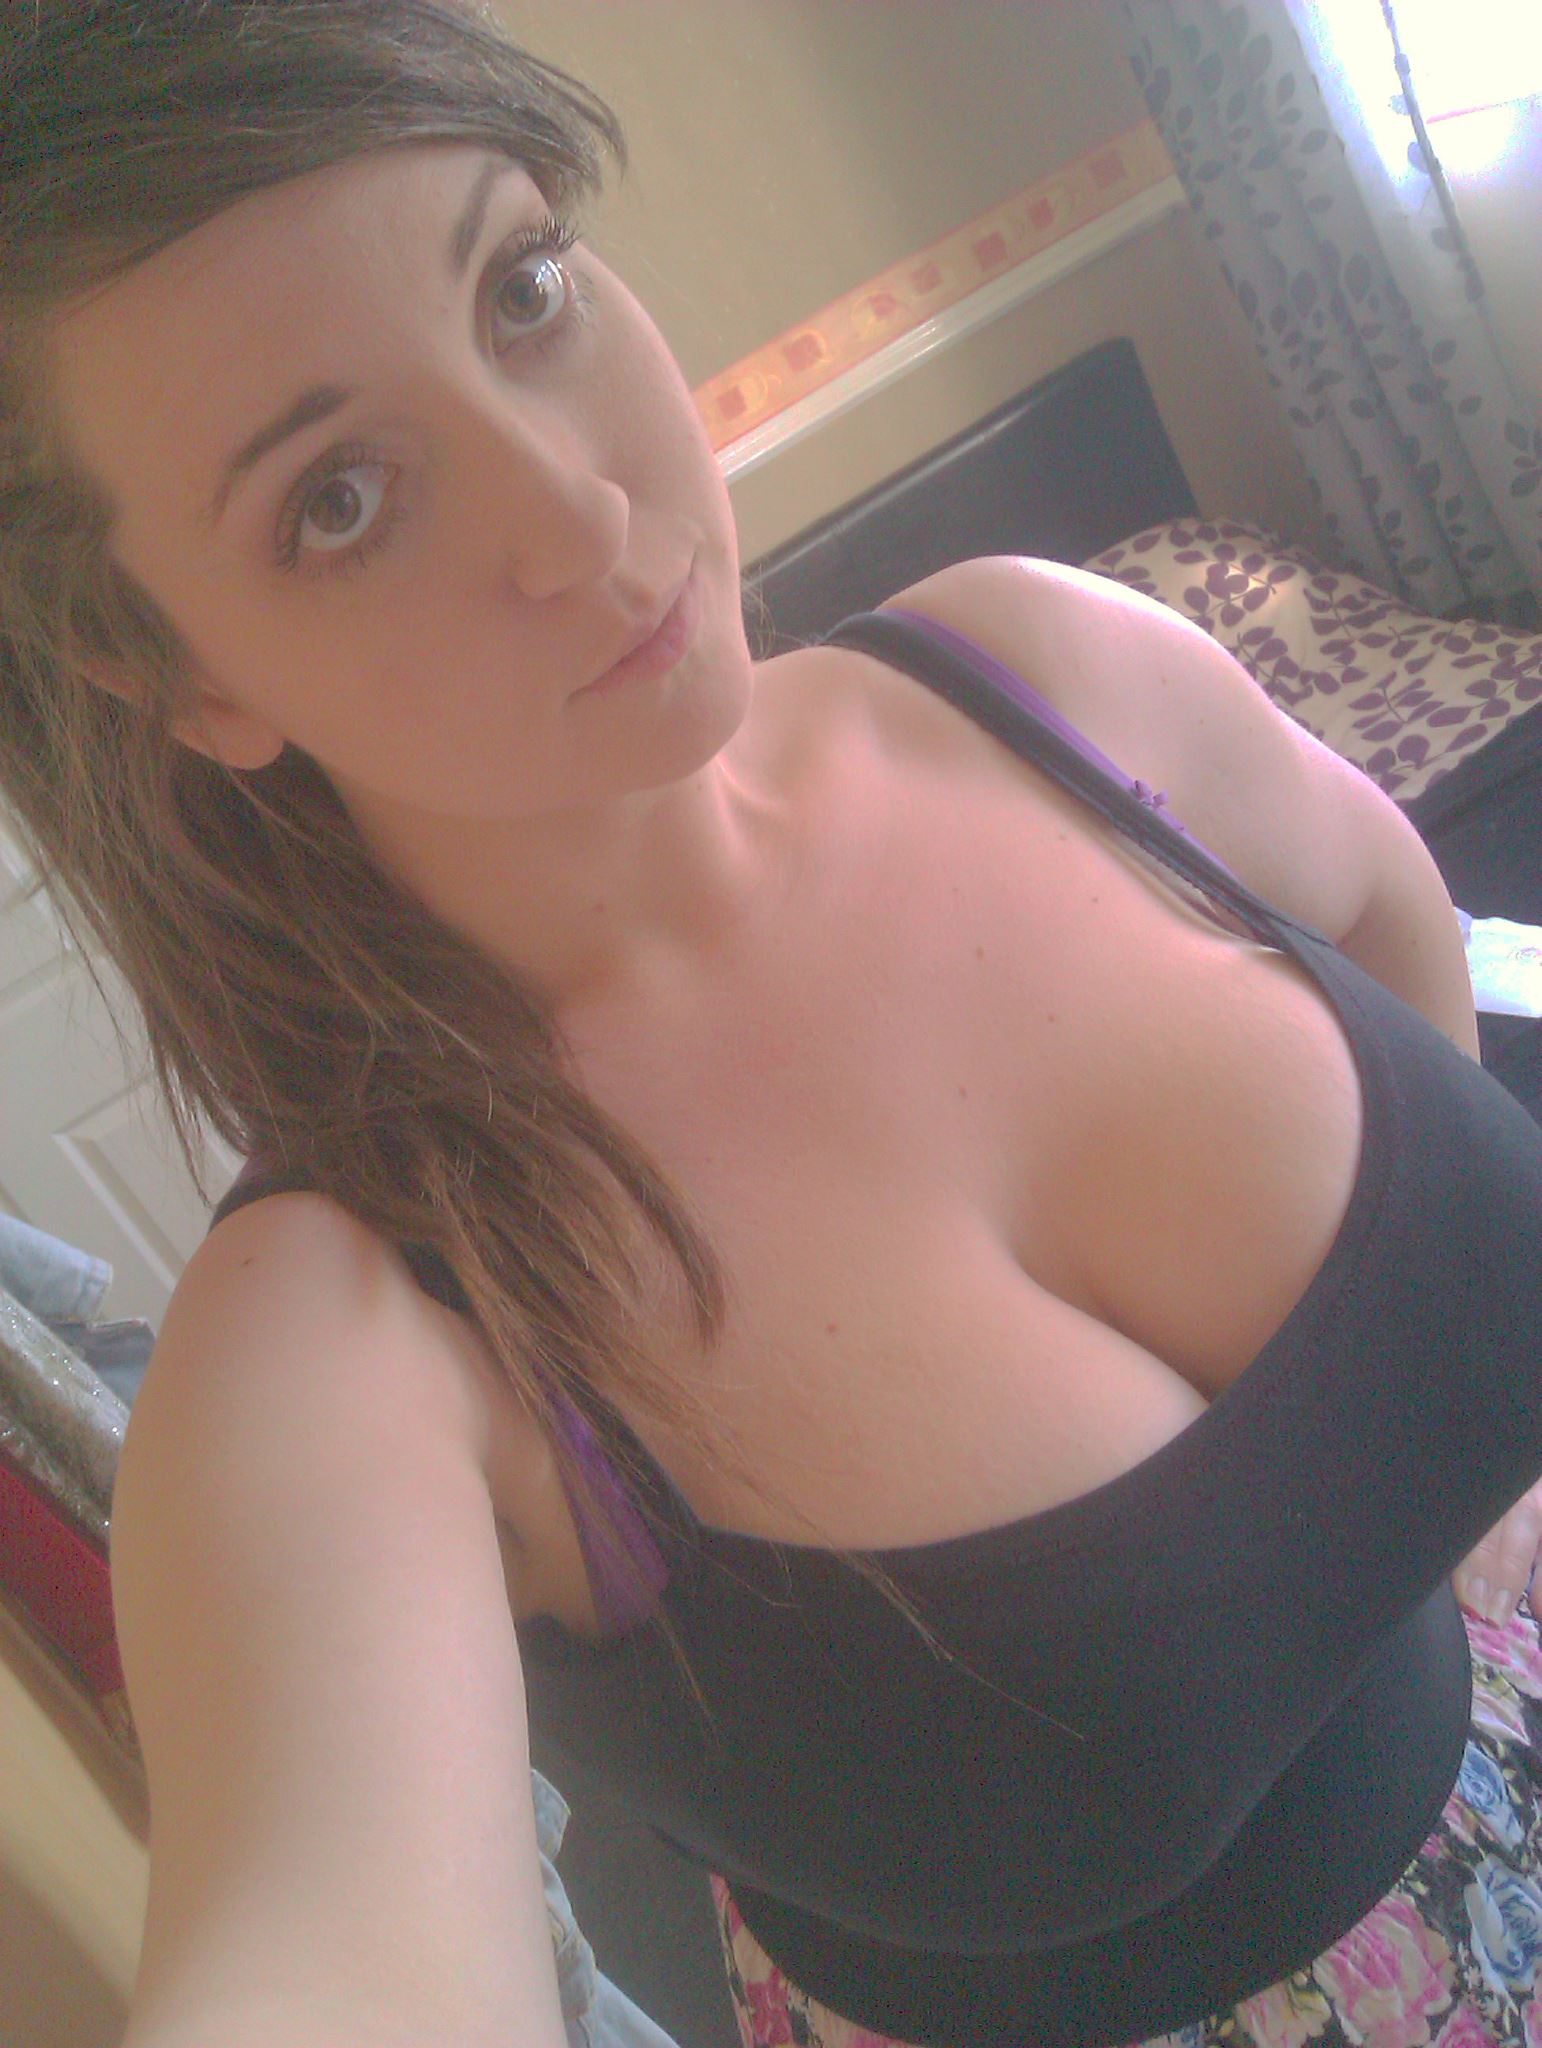 Cute and curvy cleavage Porn pic pic